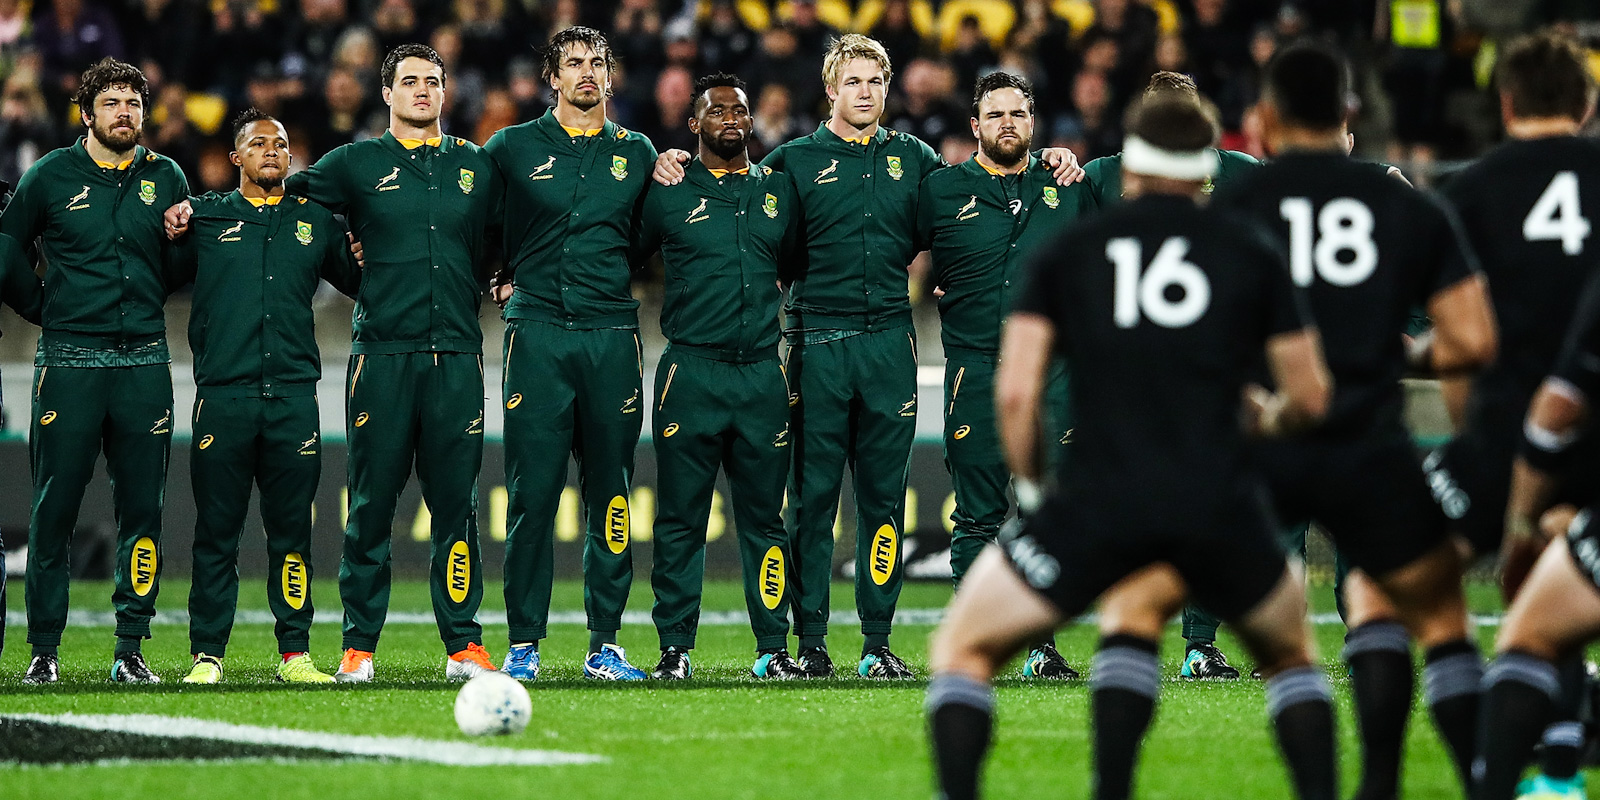 The Boks will face the All Blacks on two consecutive weekends in New Zealand.